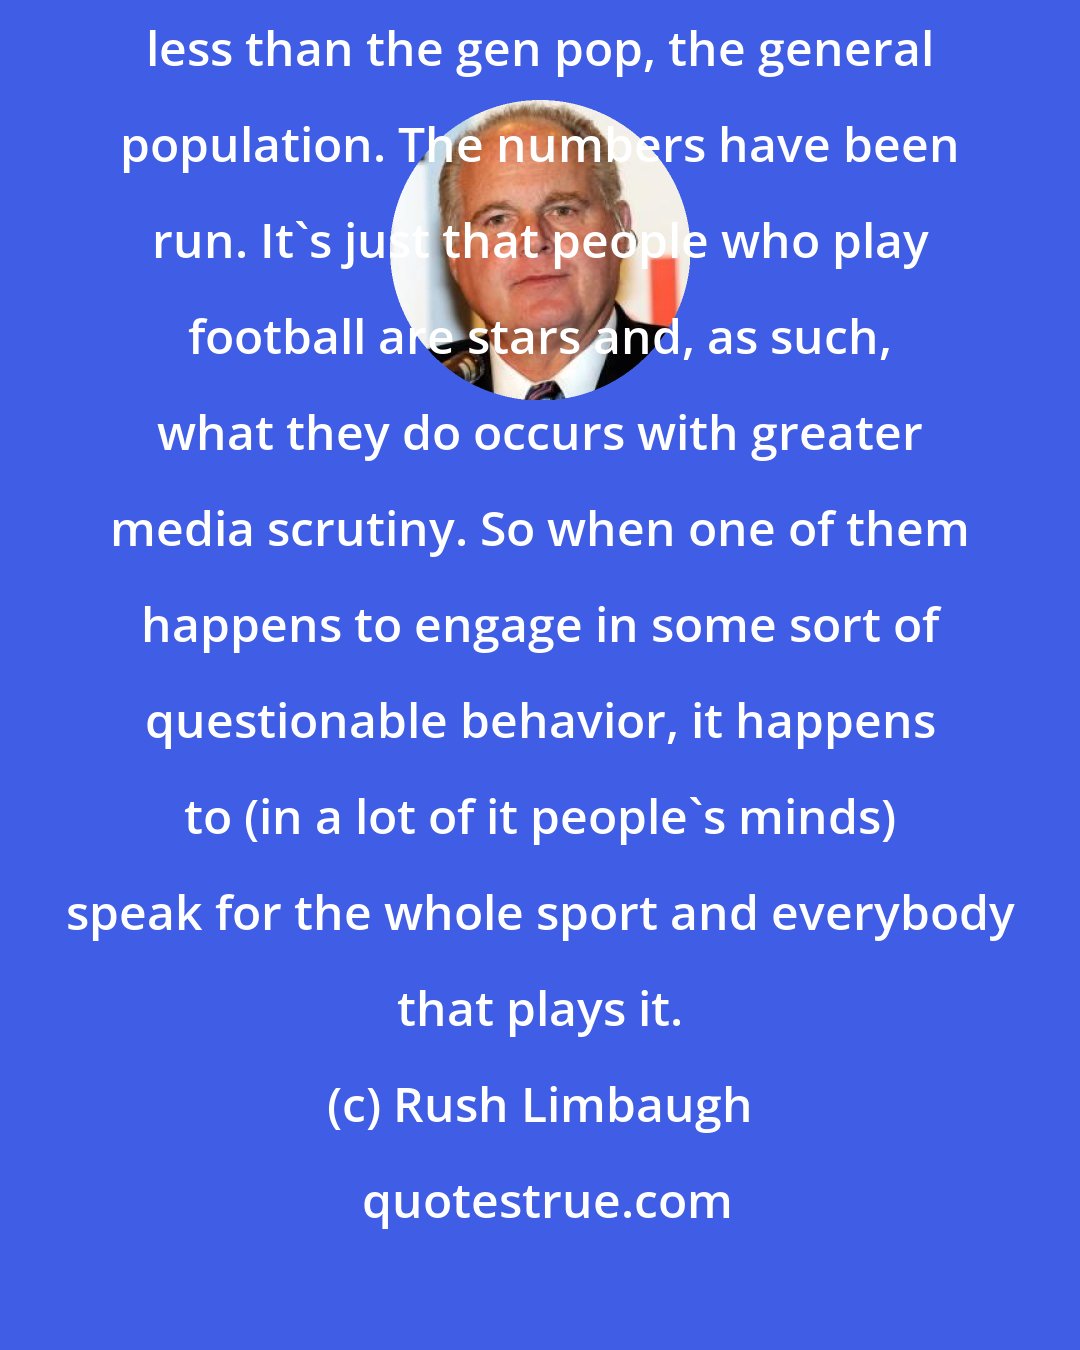 Rush Limbaugh: Football leads to a crime rate among people that play in the NFL that is less than the gen pop, the general population. The numbers have been run. It's just that people who play football are stars and, as such, what they do occurs with greater media scrutiny. So when one of them happens to engage in some sort of questionable behavior, it happens to (in a lot of it people's minds) speak for the whole sport and everybody that plays it.